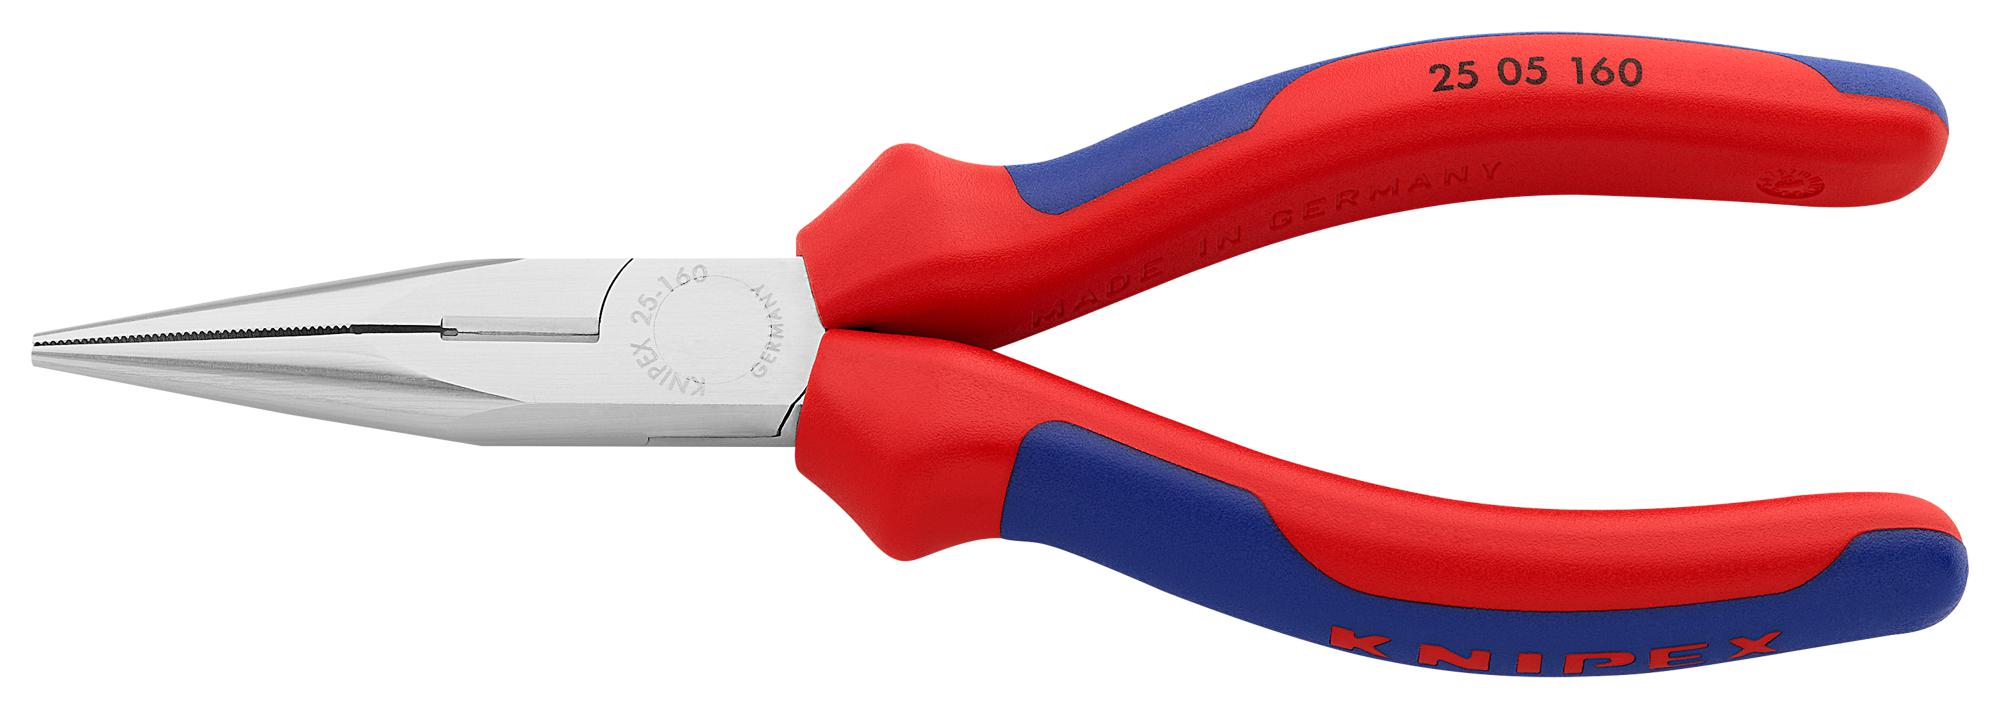 25 05 160 COMBINATION PLIER, 160MM KNIPEX